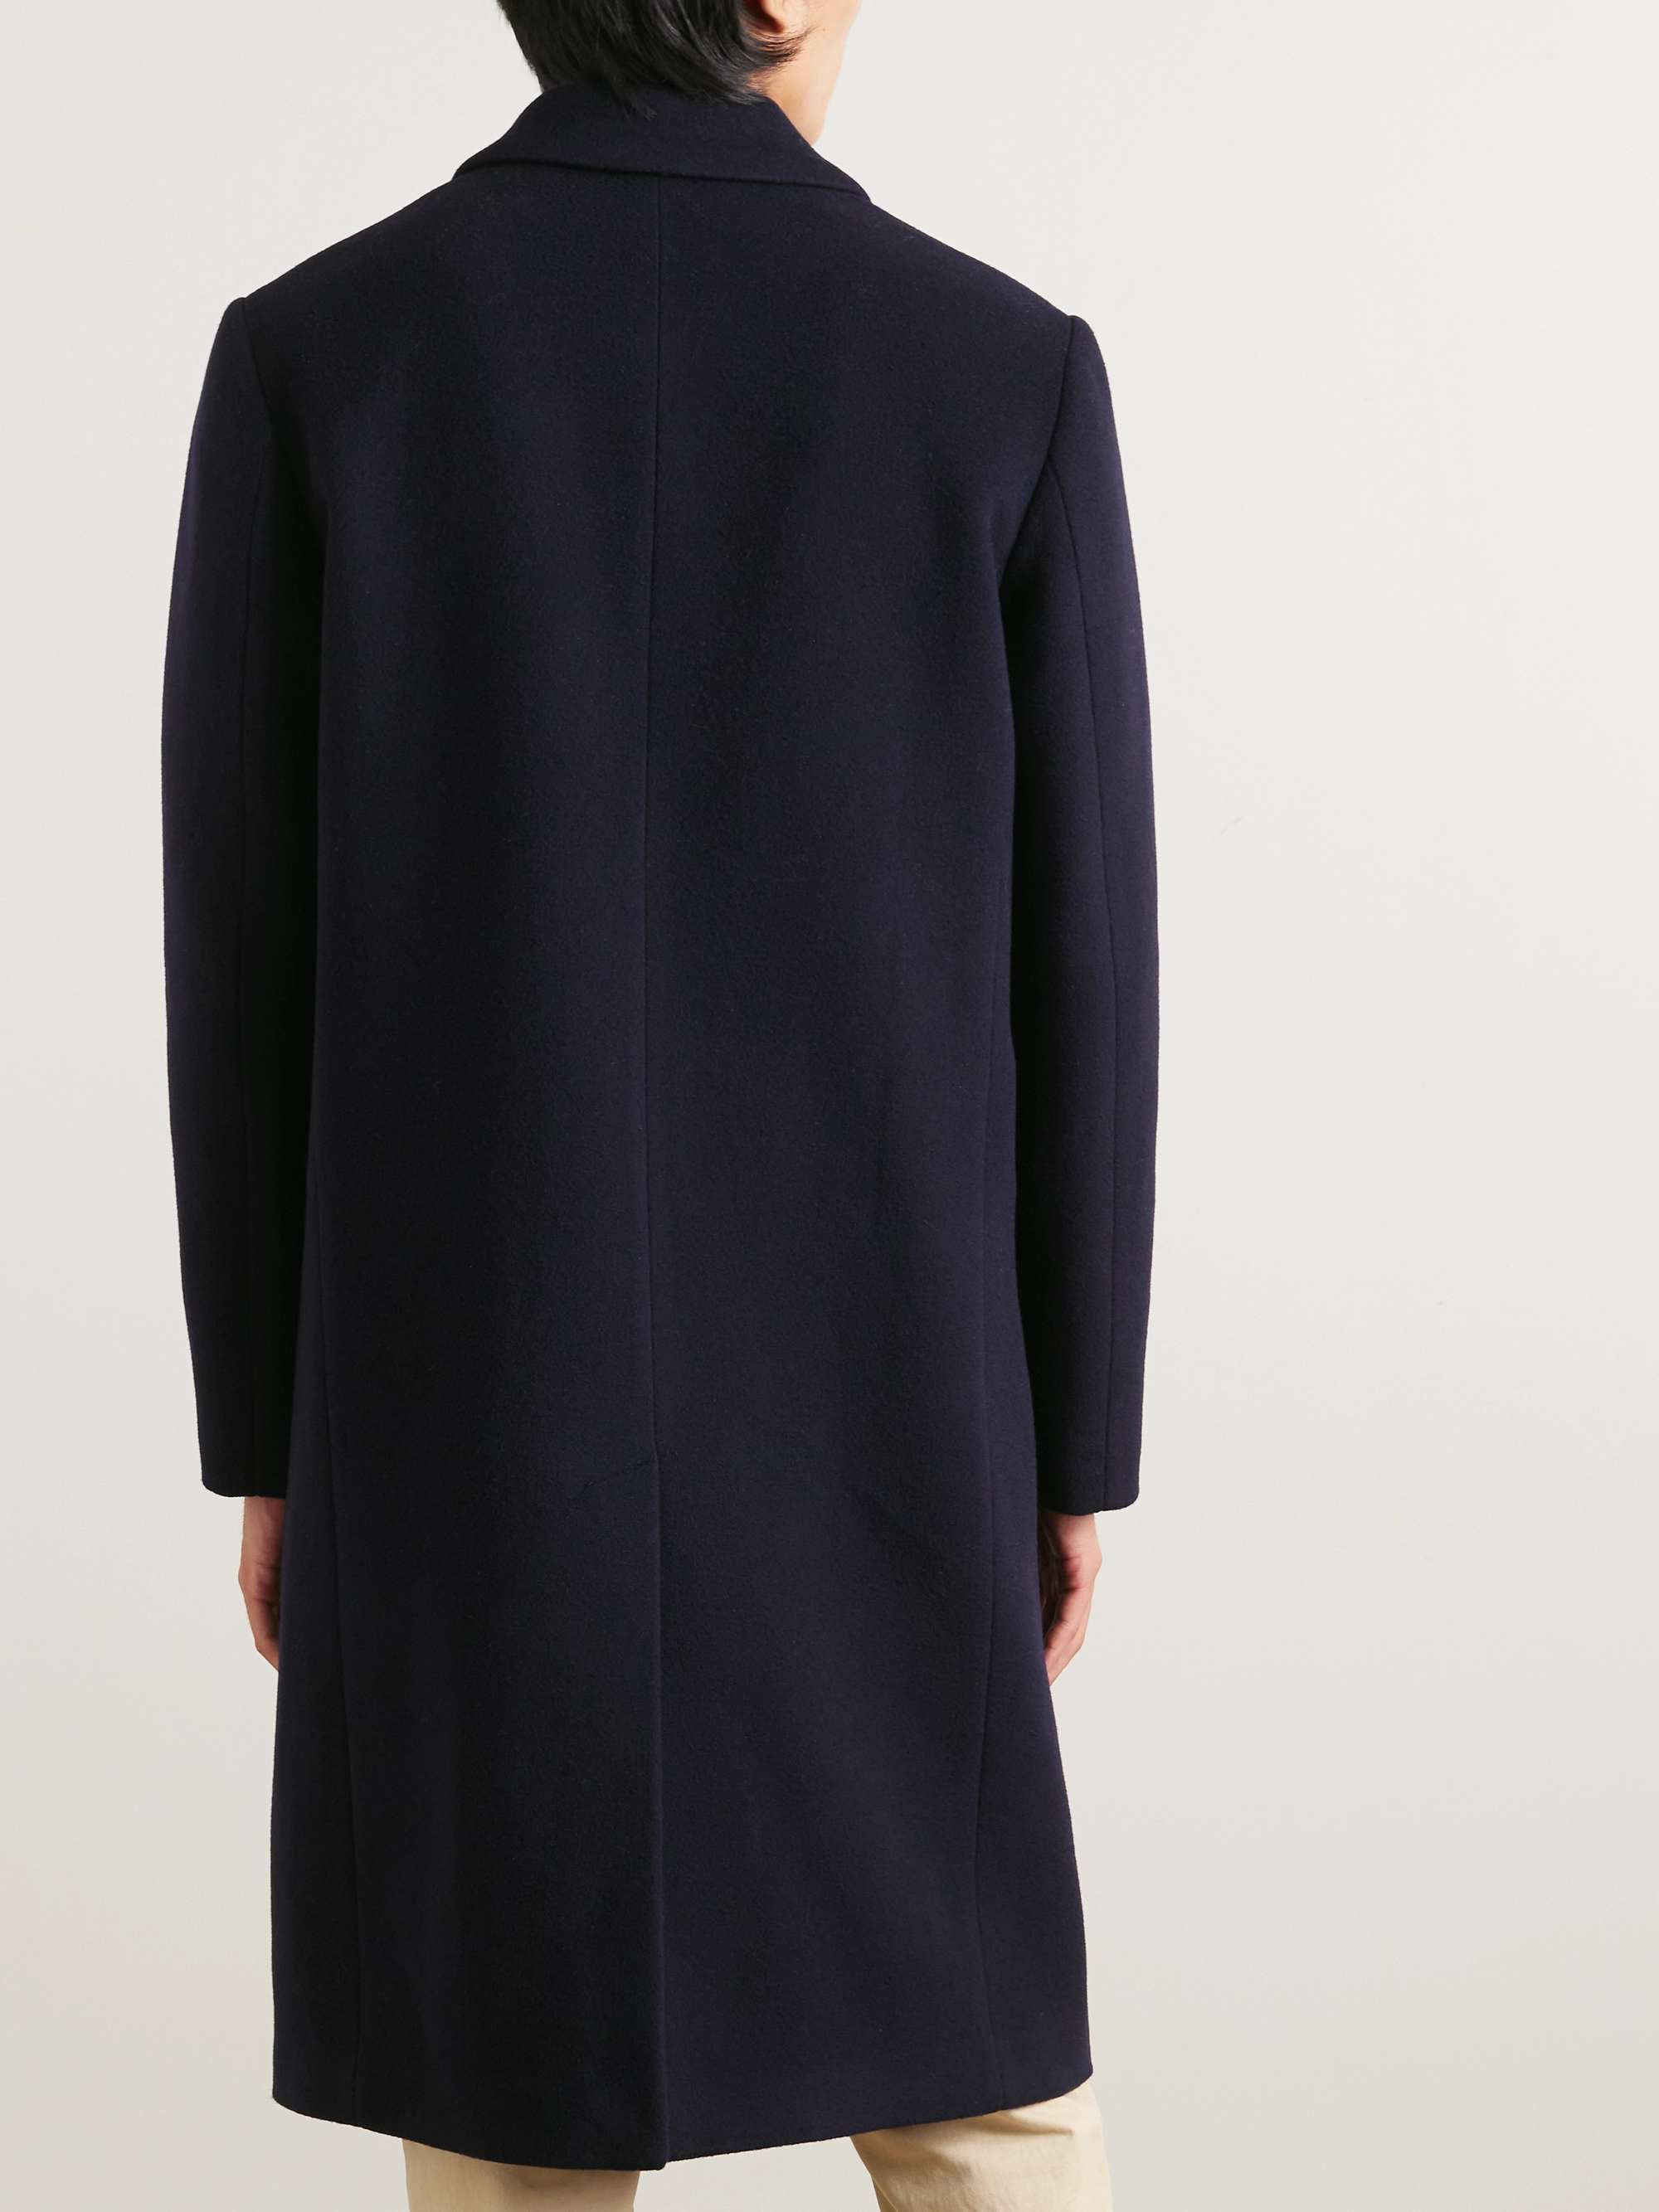 MR P. Virgin Wool and Cashmere-Blend Coat